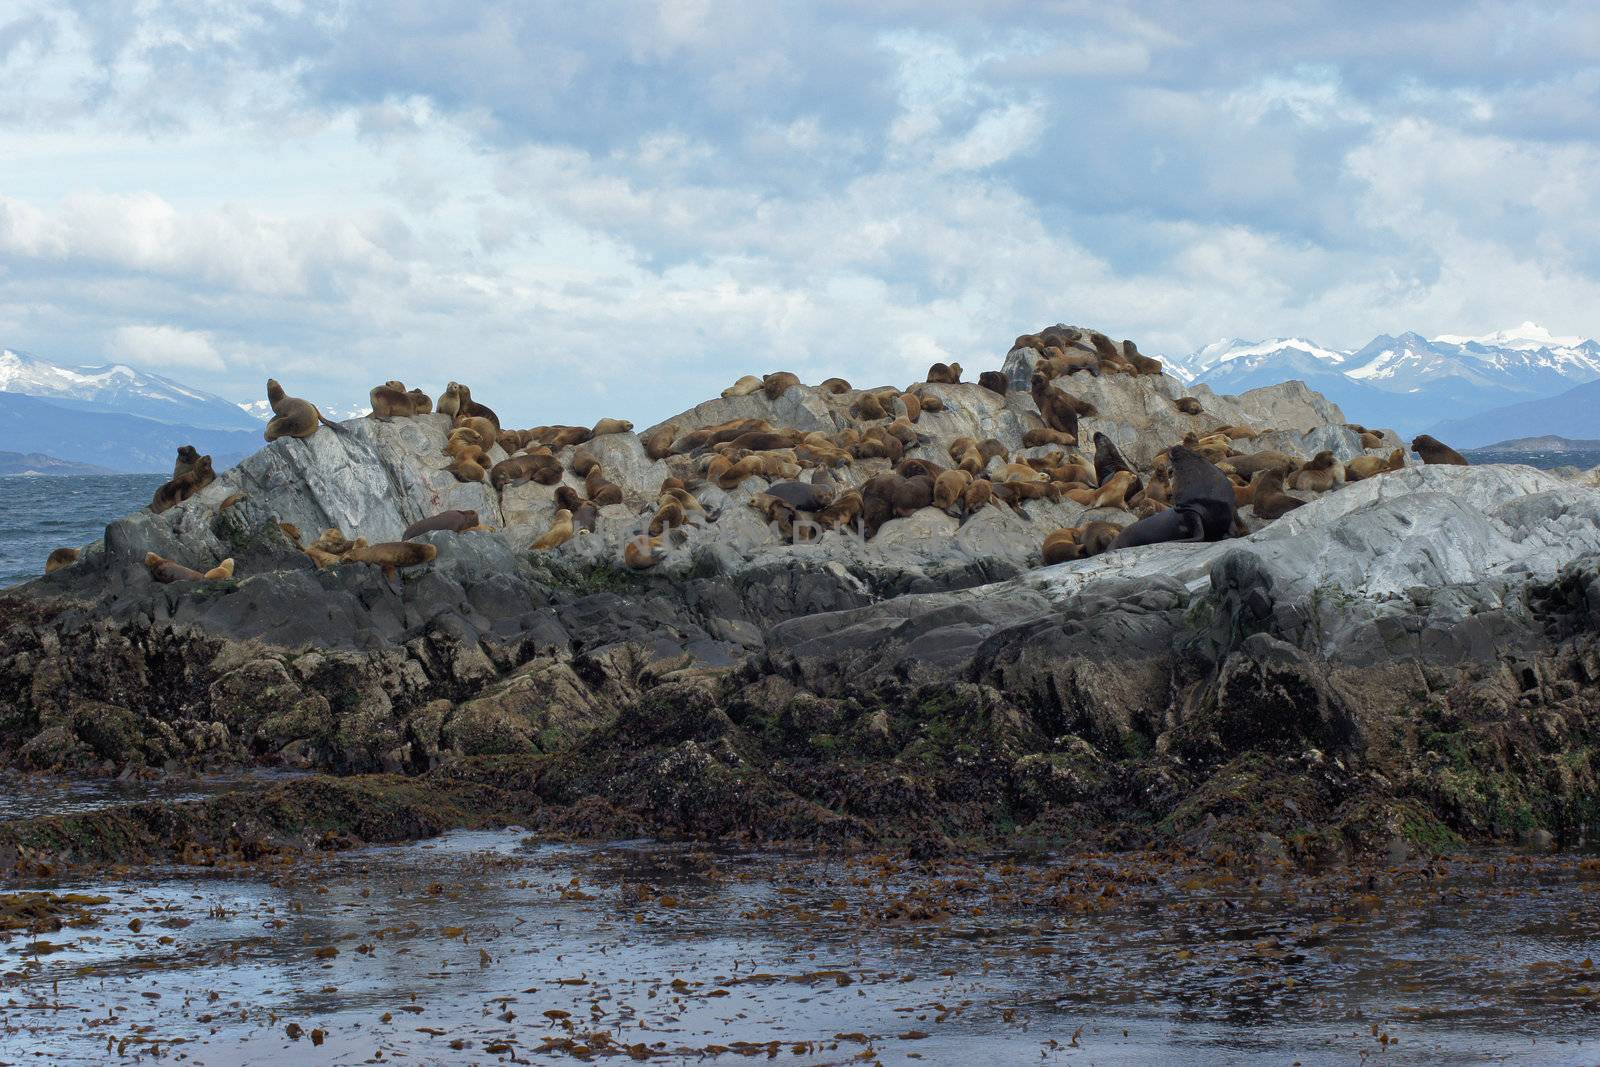 Sea lions colony within the Beagle Channel, Ushuaia, Argentina